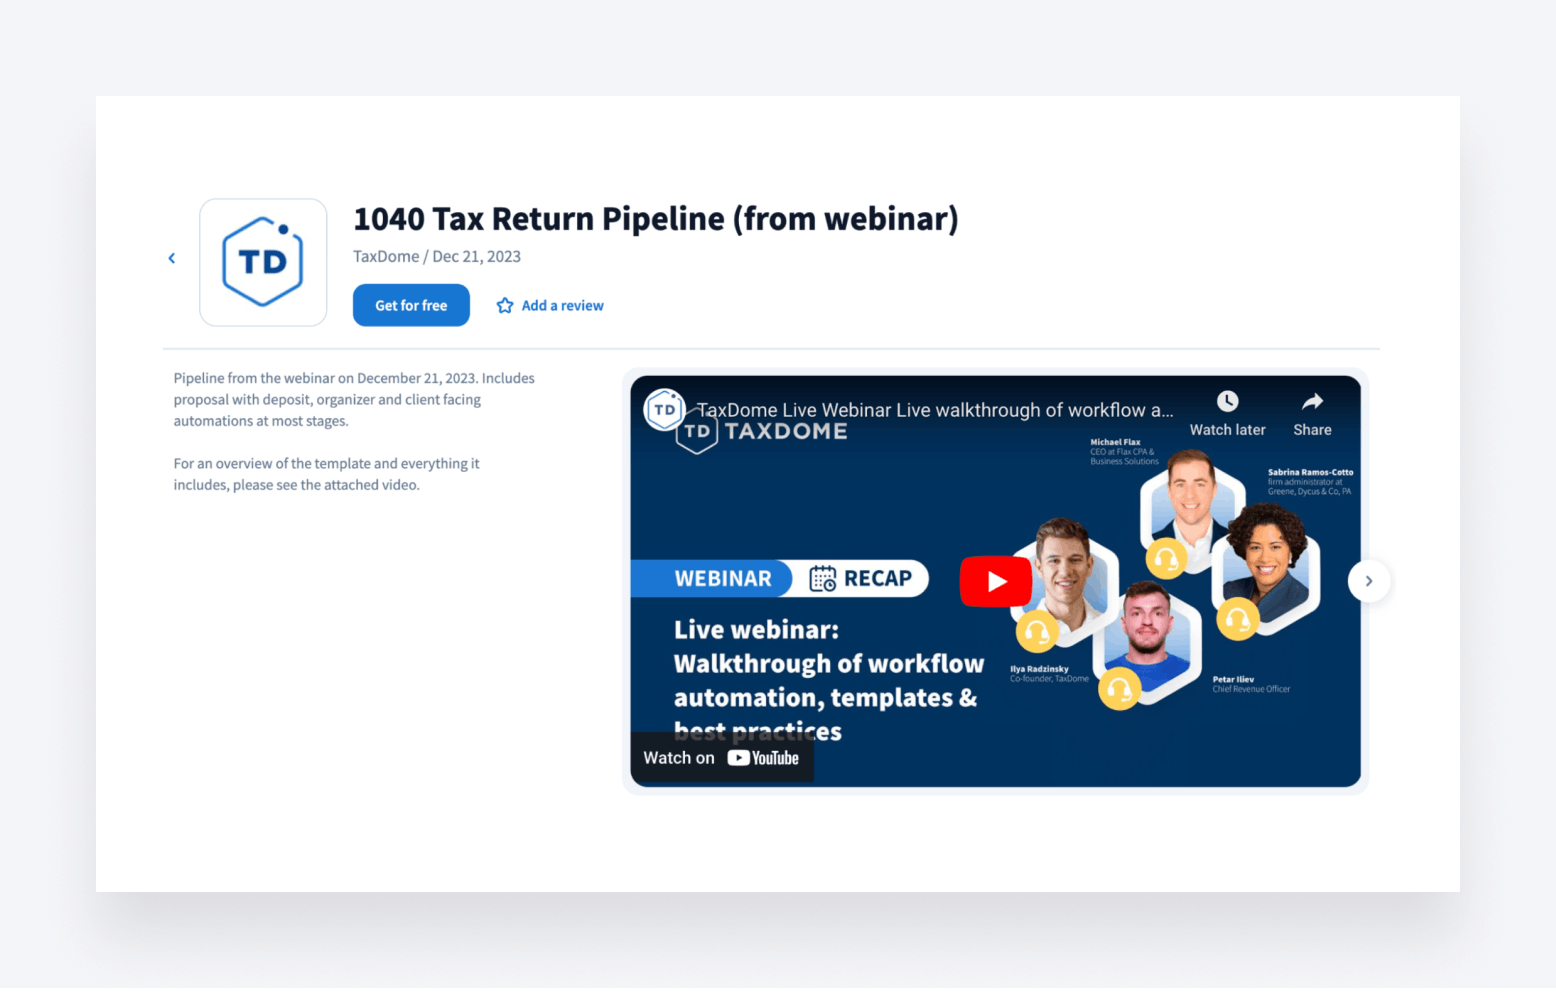 1040 Tax Return Pipeline is another free TaxDome template you can download on TaxDome Marketplace.